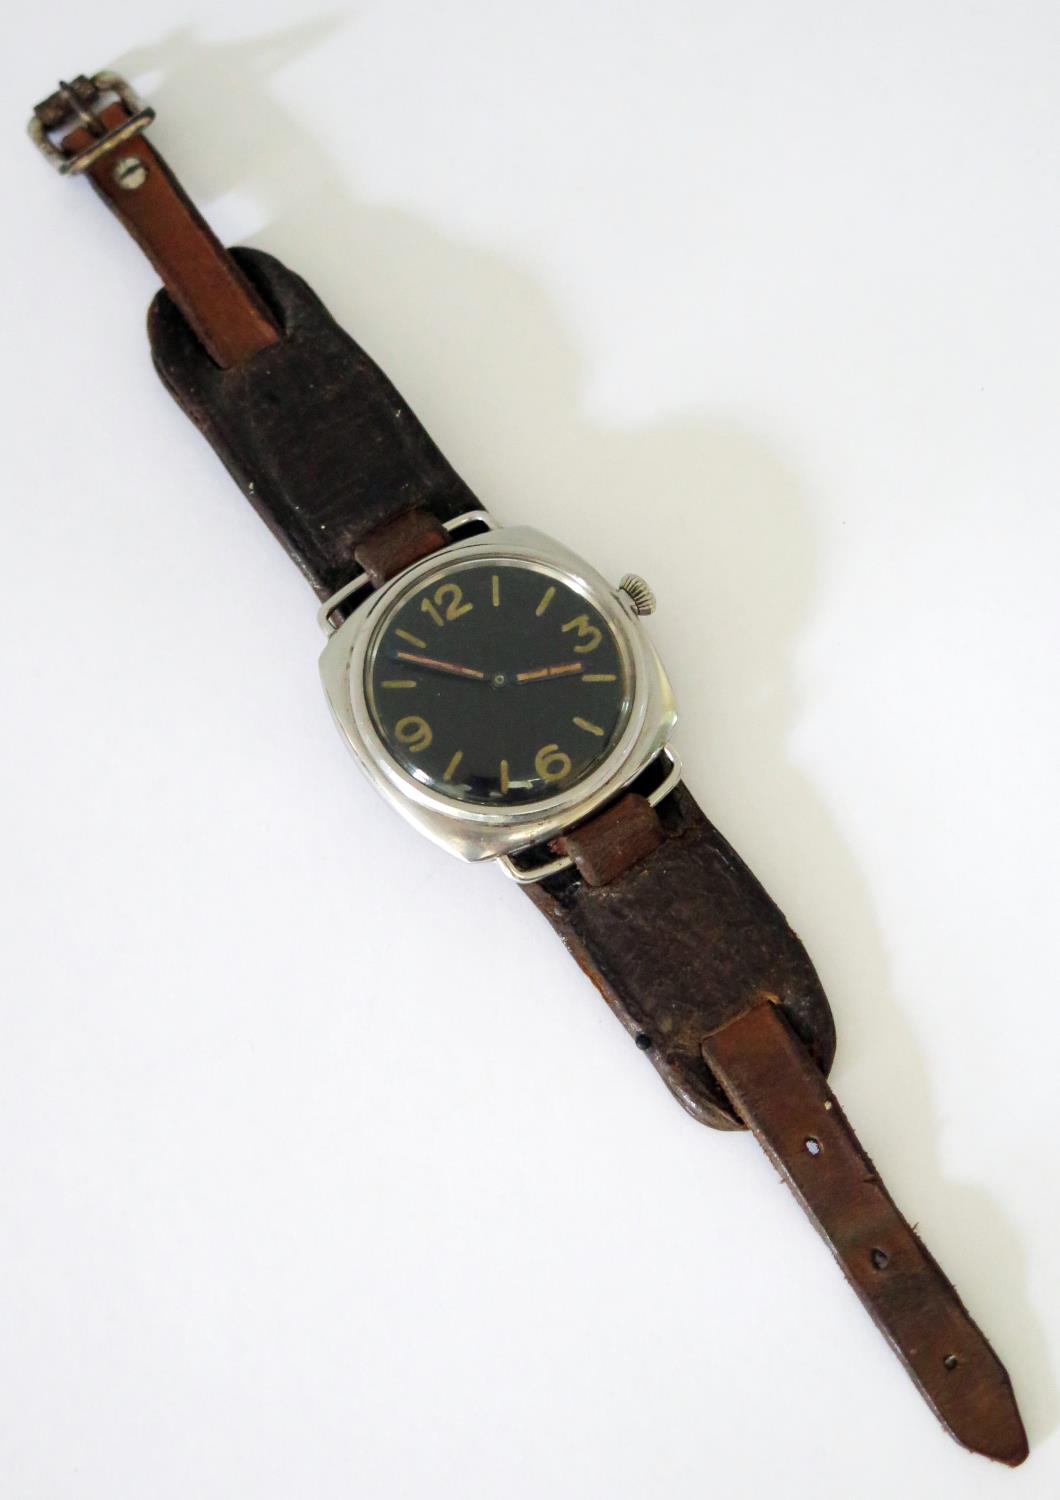 A Rare Panerai WWII Diver's (Kampfschwimmer) Watch. 1944 3646 Type E Rolex 618 Type 1 with anonymous - Image 13 of 13